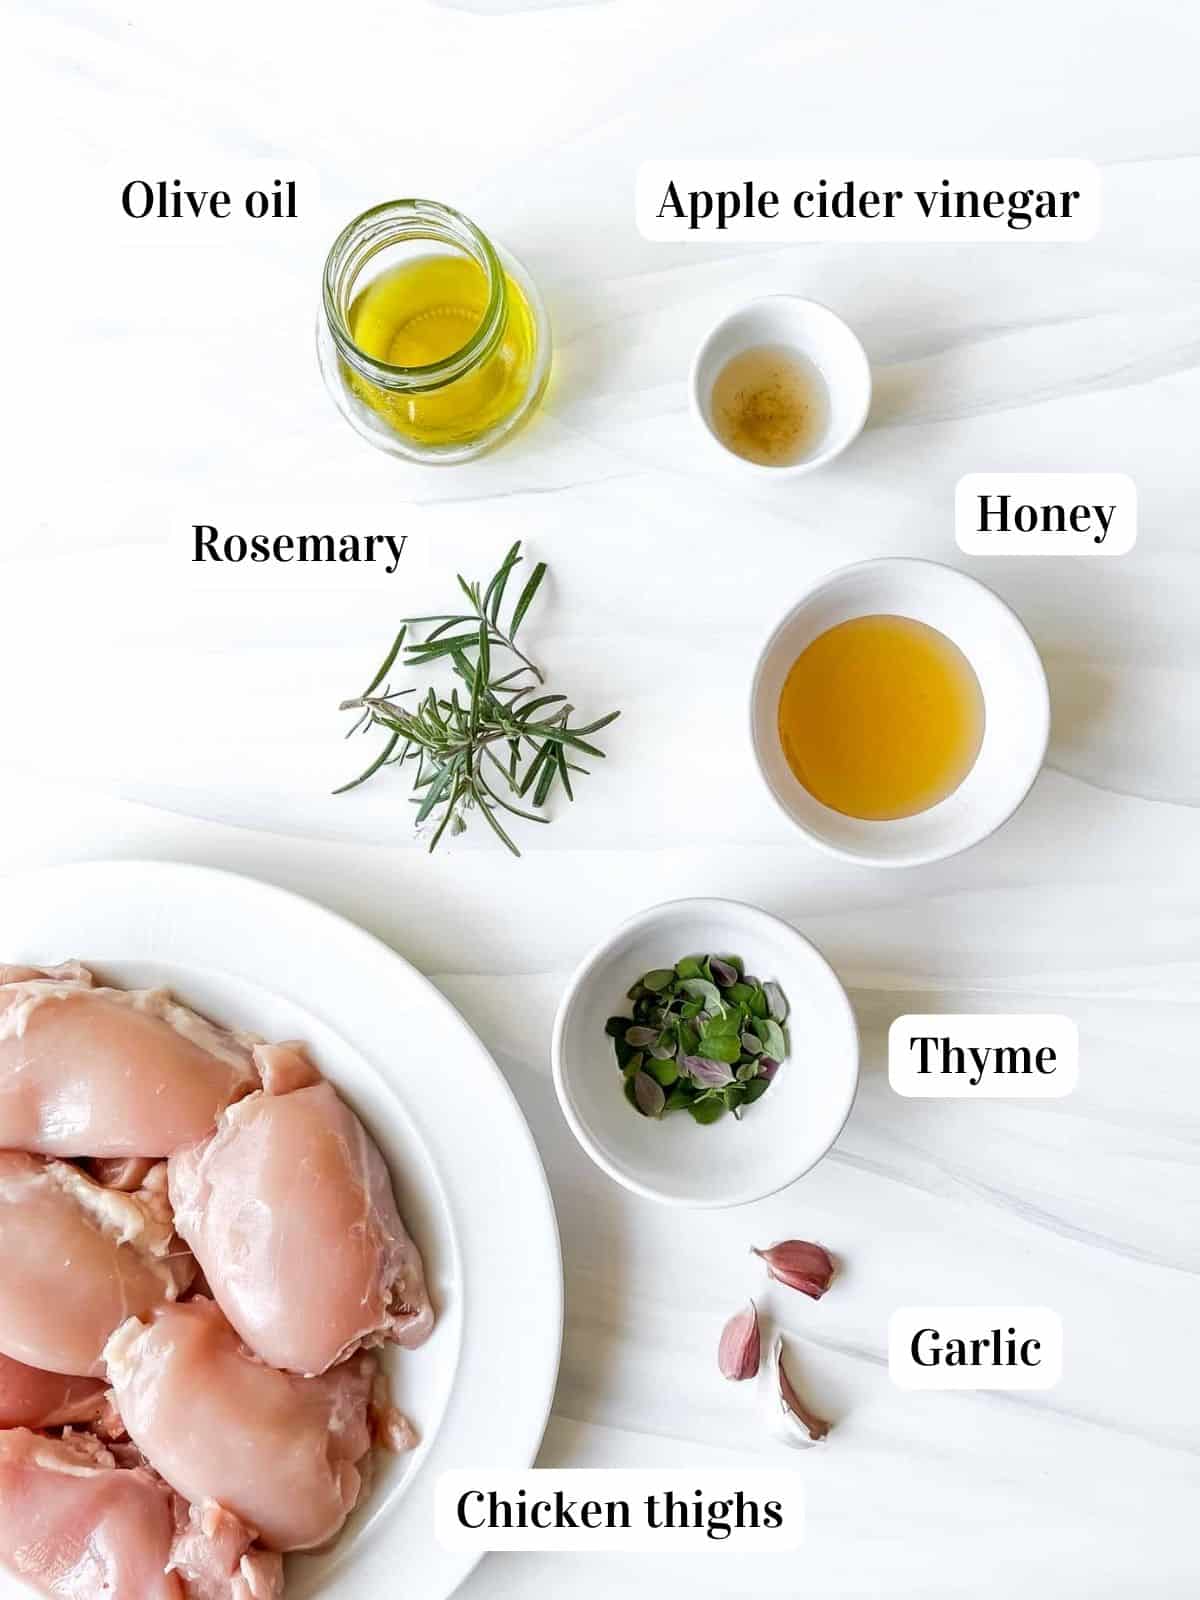 individually labelled ingredients to make baked rosemary thyme chicken including olive oil, garlic and honey.